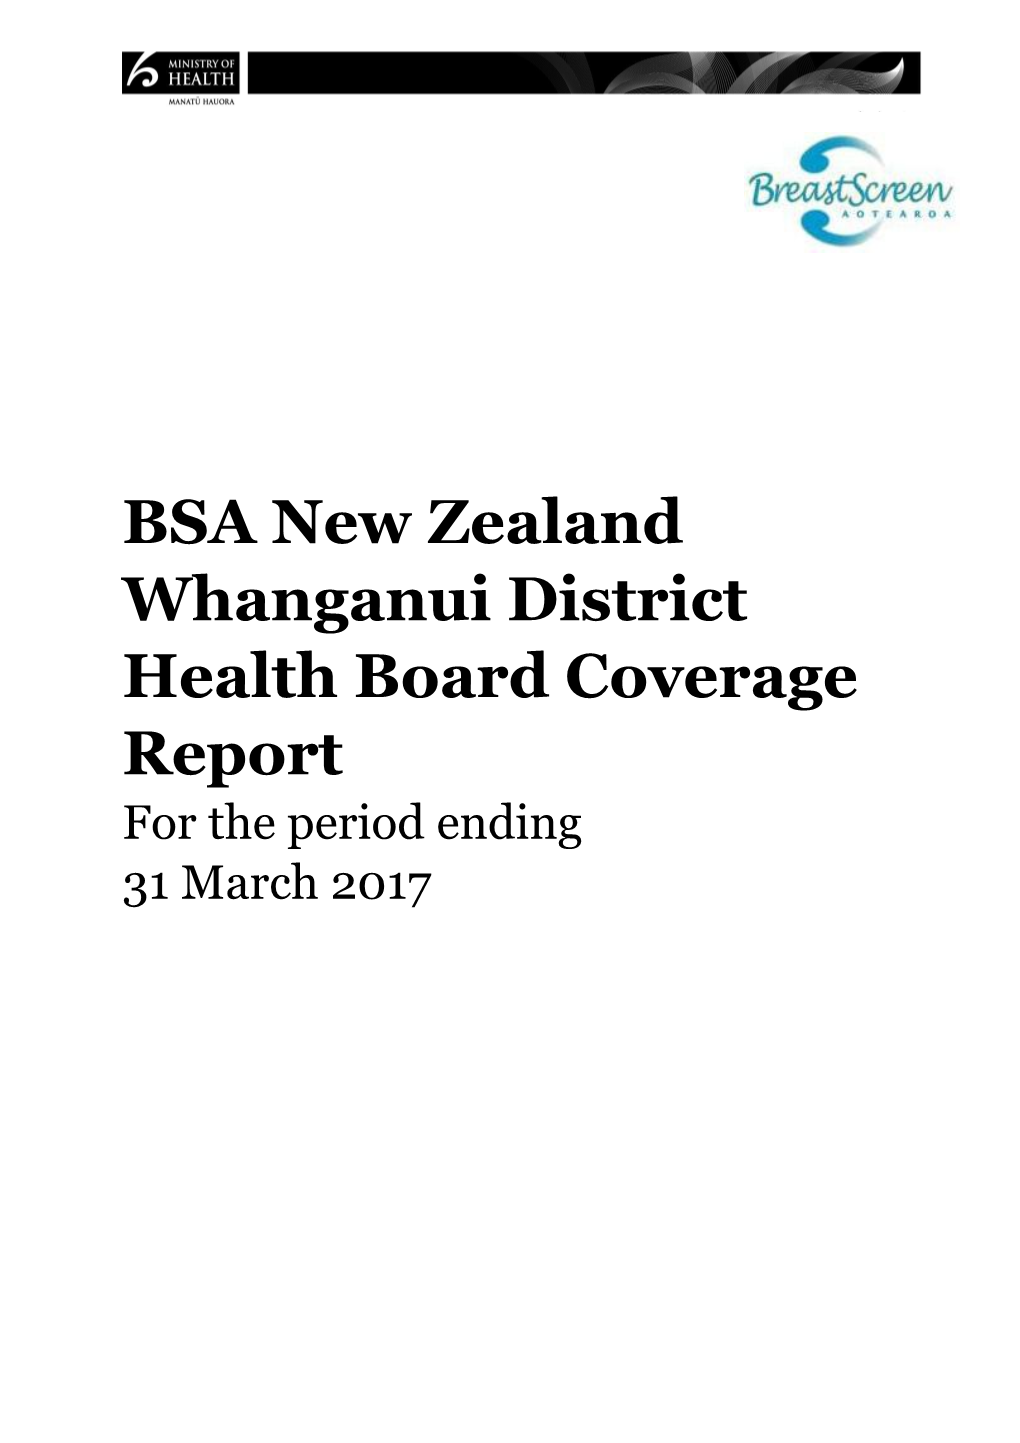 Bsanew Zealand Whanganui District Health Boardcoverage Report